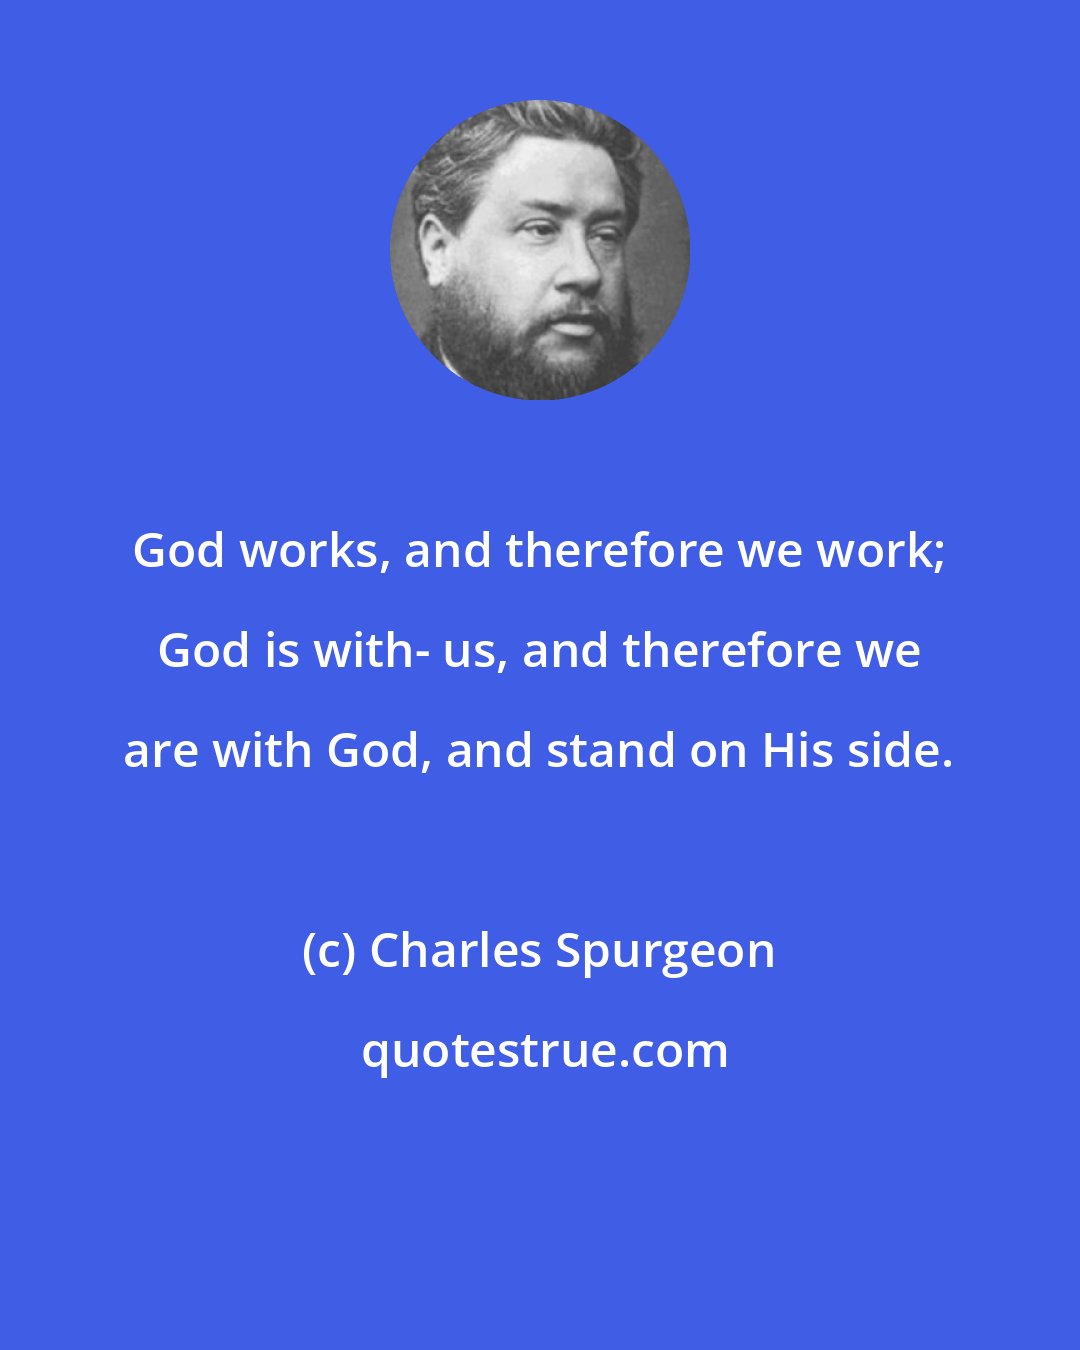 Charles Spurgeon: God works, and therefore we work; God is with- us, and therefore we are with God, and stand on His side.